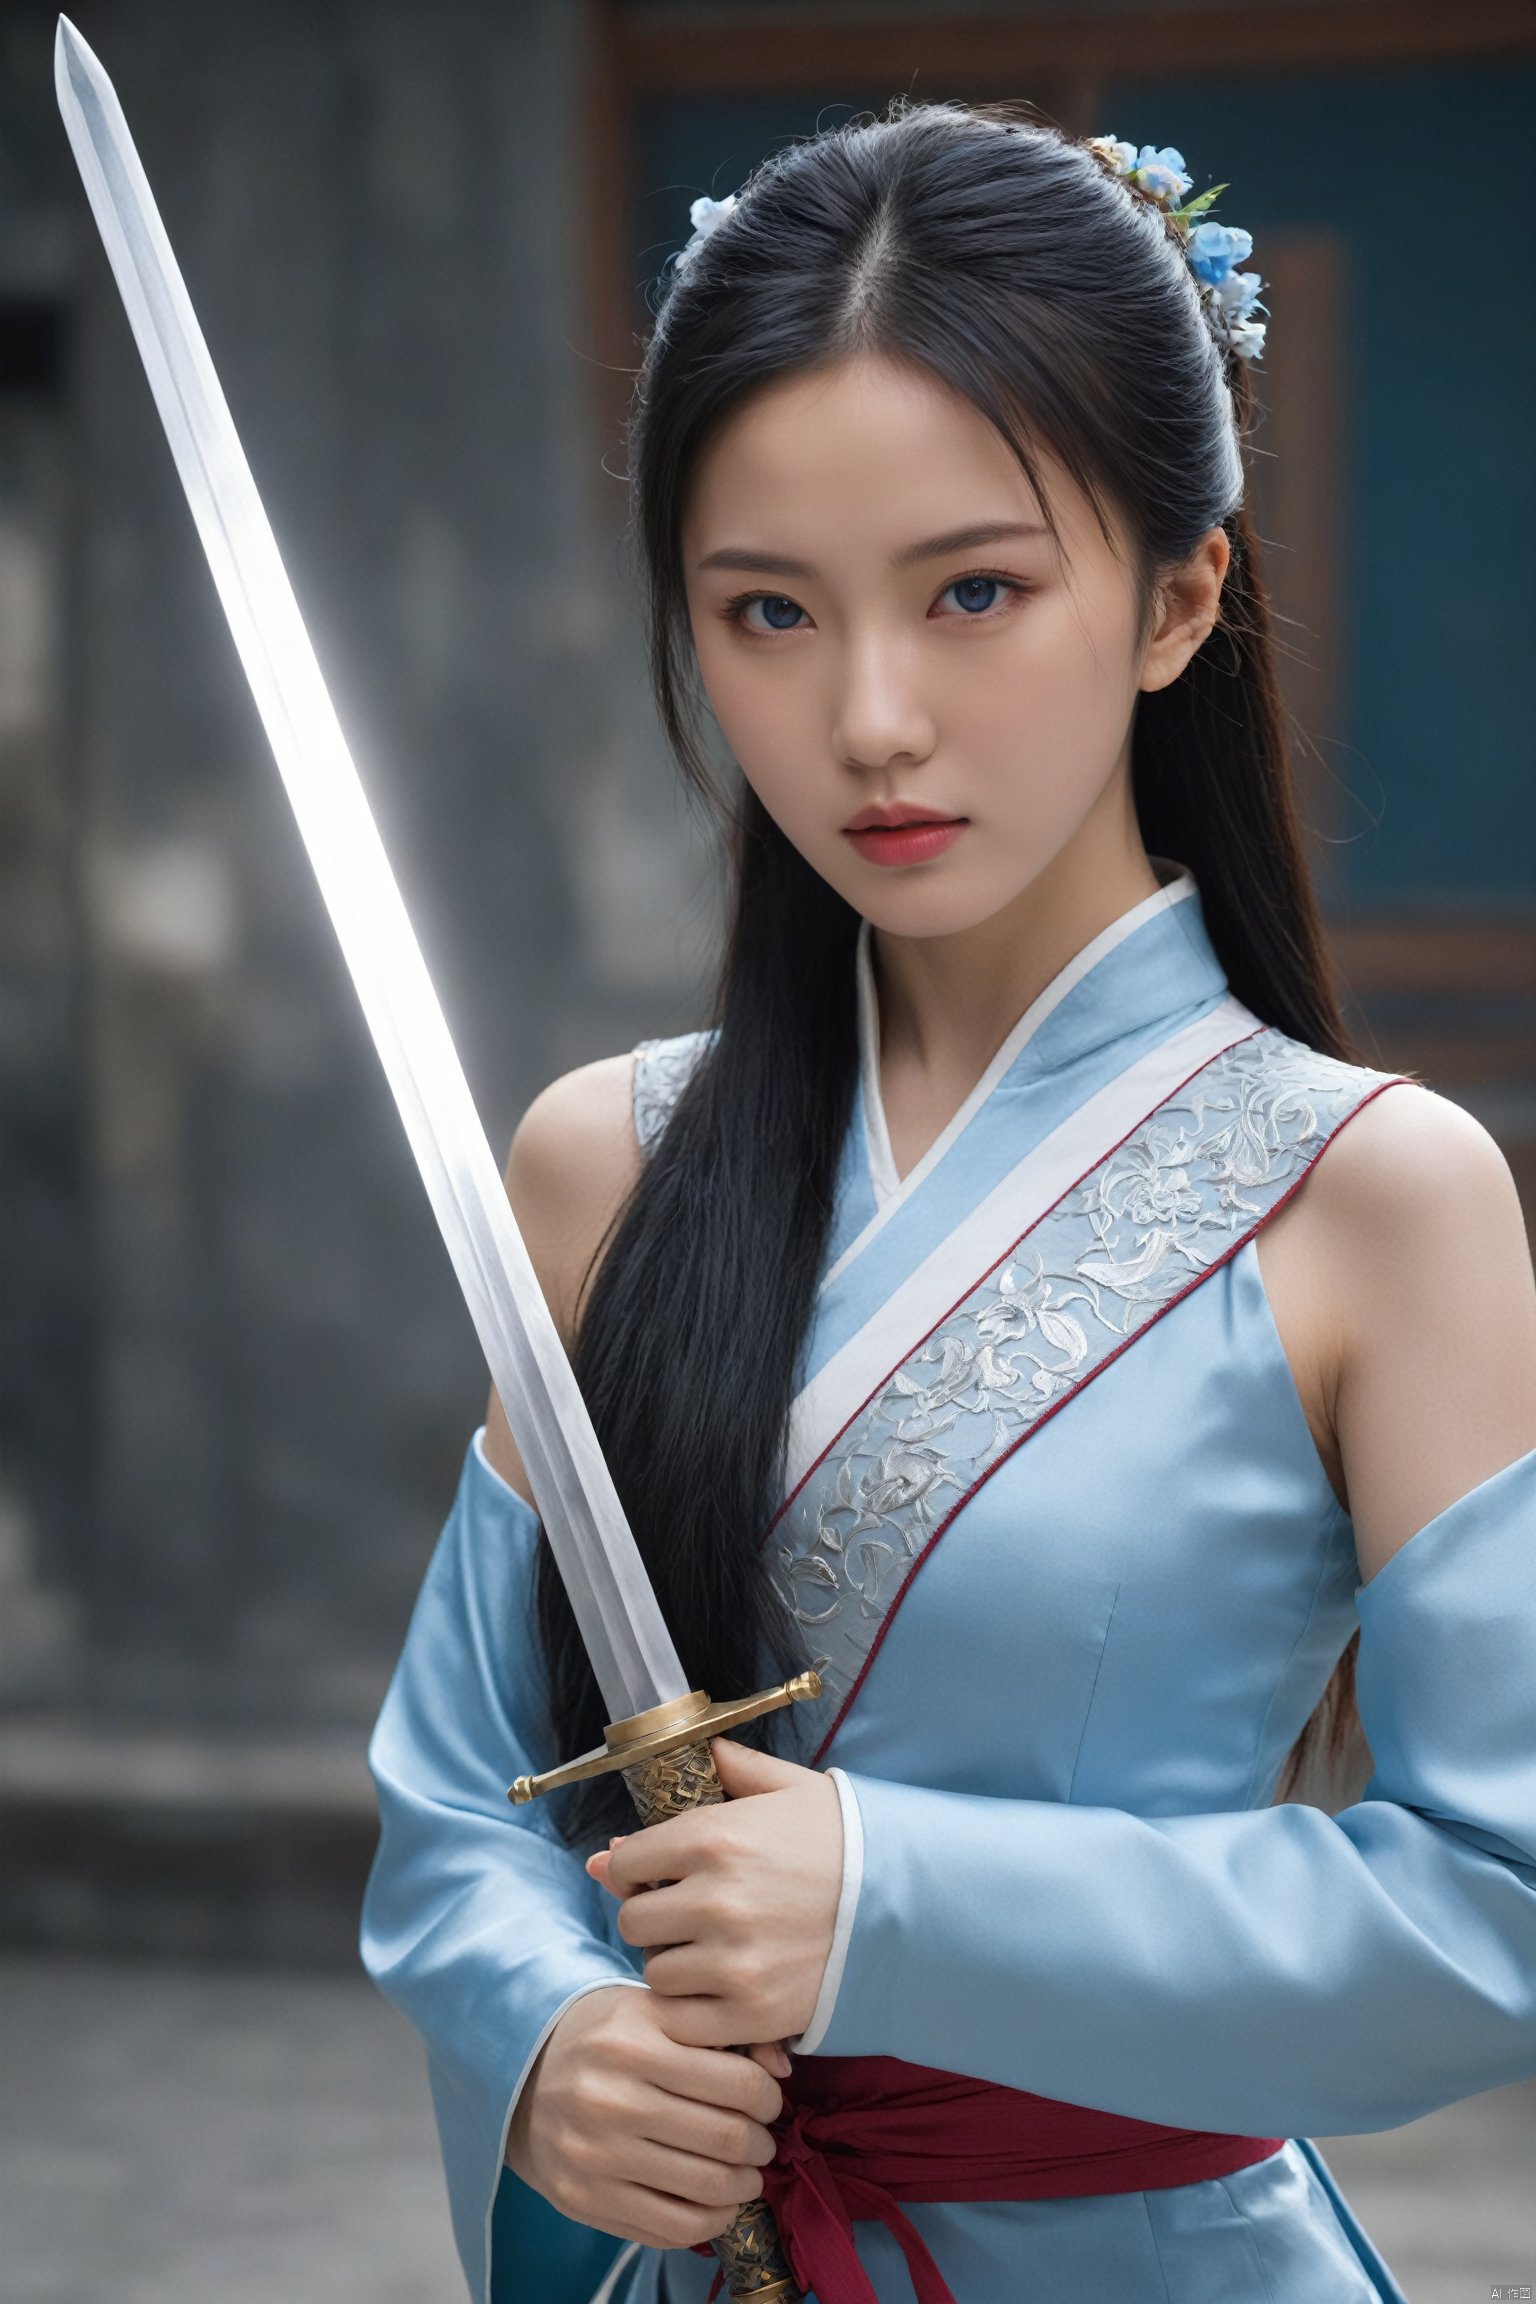  photorealistic,portrait of hubggirl, 
(ultra realistic,best quality),photorealistic,Extremely Realistic, in depth, cinematic light,

The girl wields a sword, dynamic transfer, sword fighting movements, jumps, lunges, freestanding, movements visible. The sword is long and delicate This woman is beautiful, Chinese. 17 years old, black hair. Long hair, traditional Chinese hairstyle. Full, pink lips. Long eyelashes, very bright blue eyes. The lens is wide-angle and you can see the details of the scene.,Chinese_armor,full_body,

perfect hands,perfect lighting, vibrant colors, intricate details, high detailed skin, pale skin, intricate background, realism,realistic,raw,analog,portrait,photorealistic, taken by Canon EOS,SIGMA Art Lens 35mm F1.4,ISO 200 Shutter Speed 2000,Vivid picture,hubggirl,hubg_mecha_girl